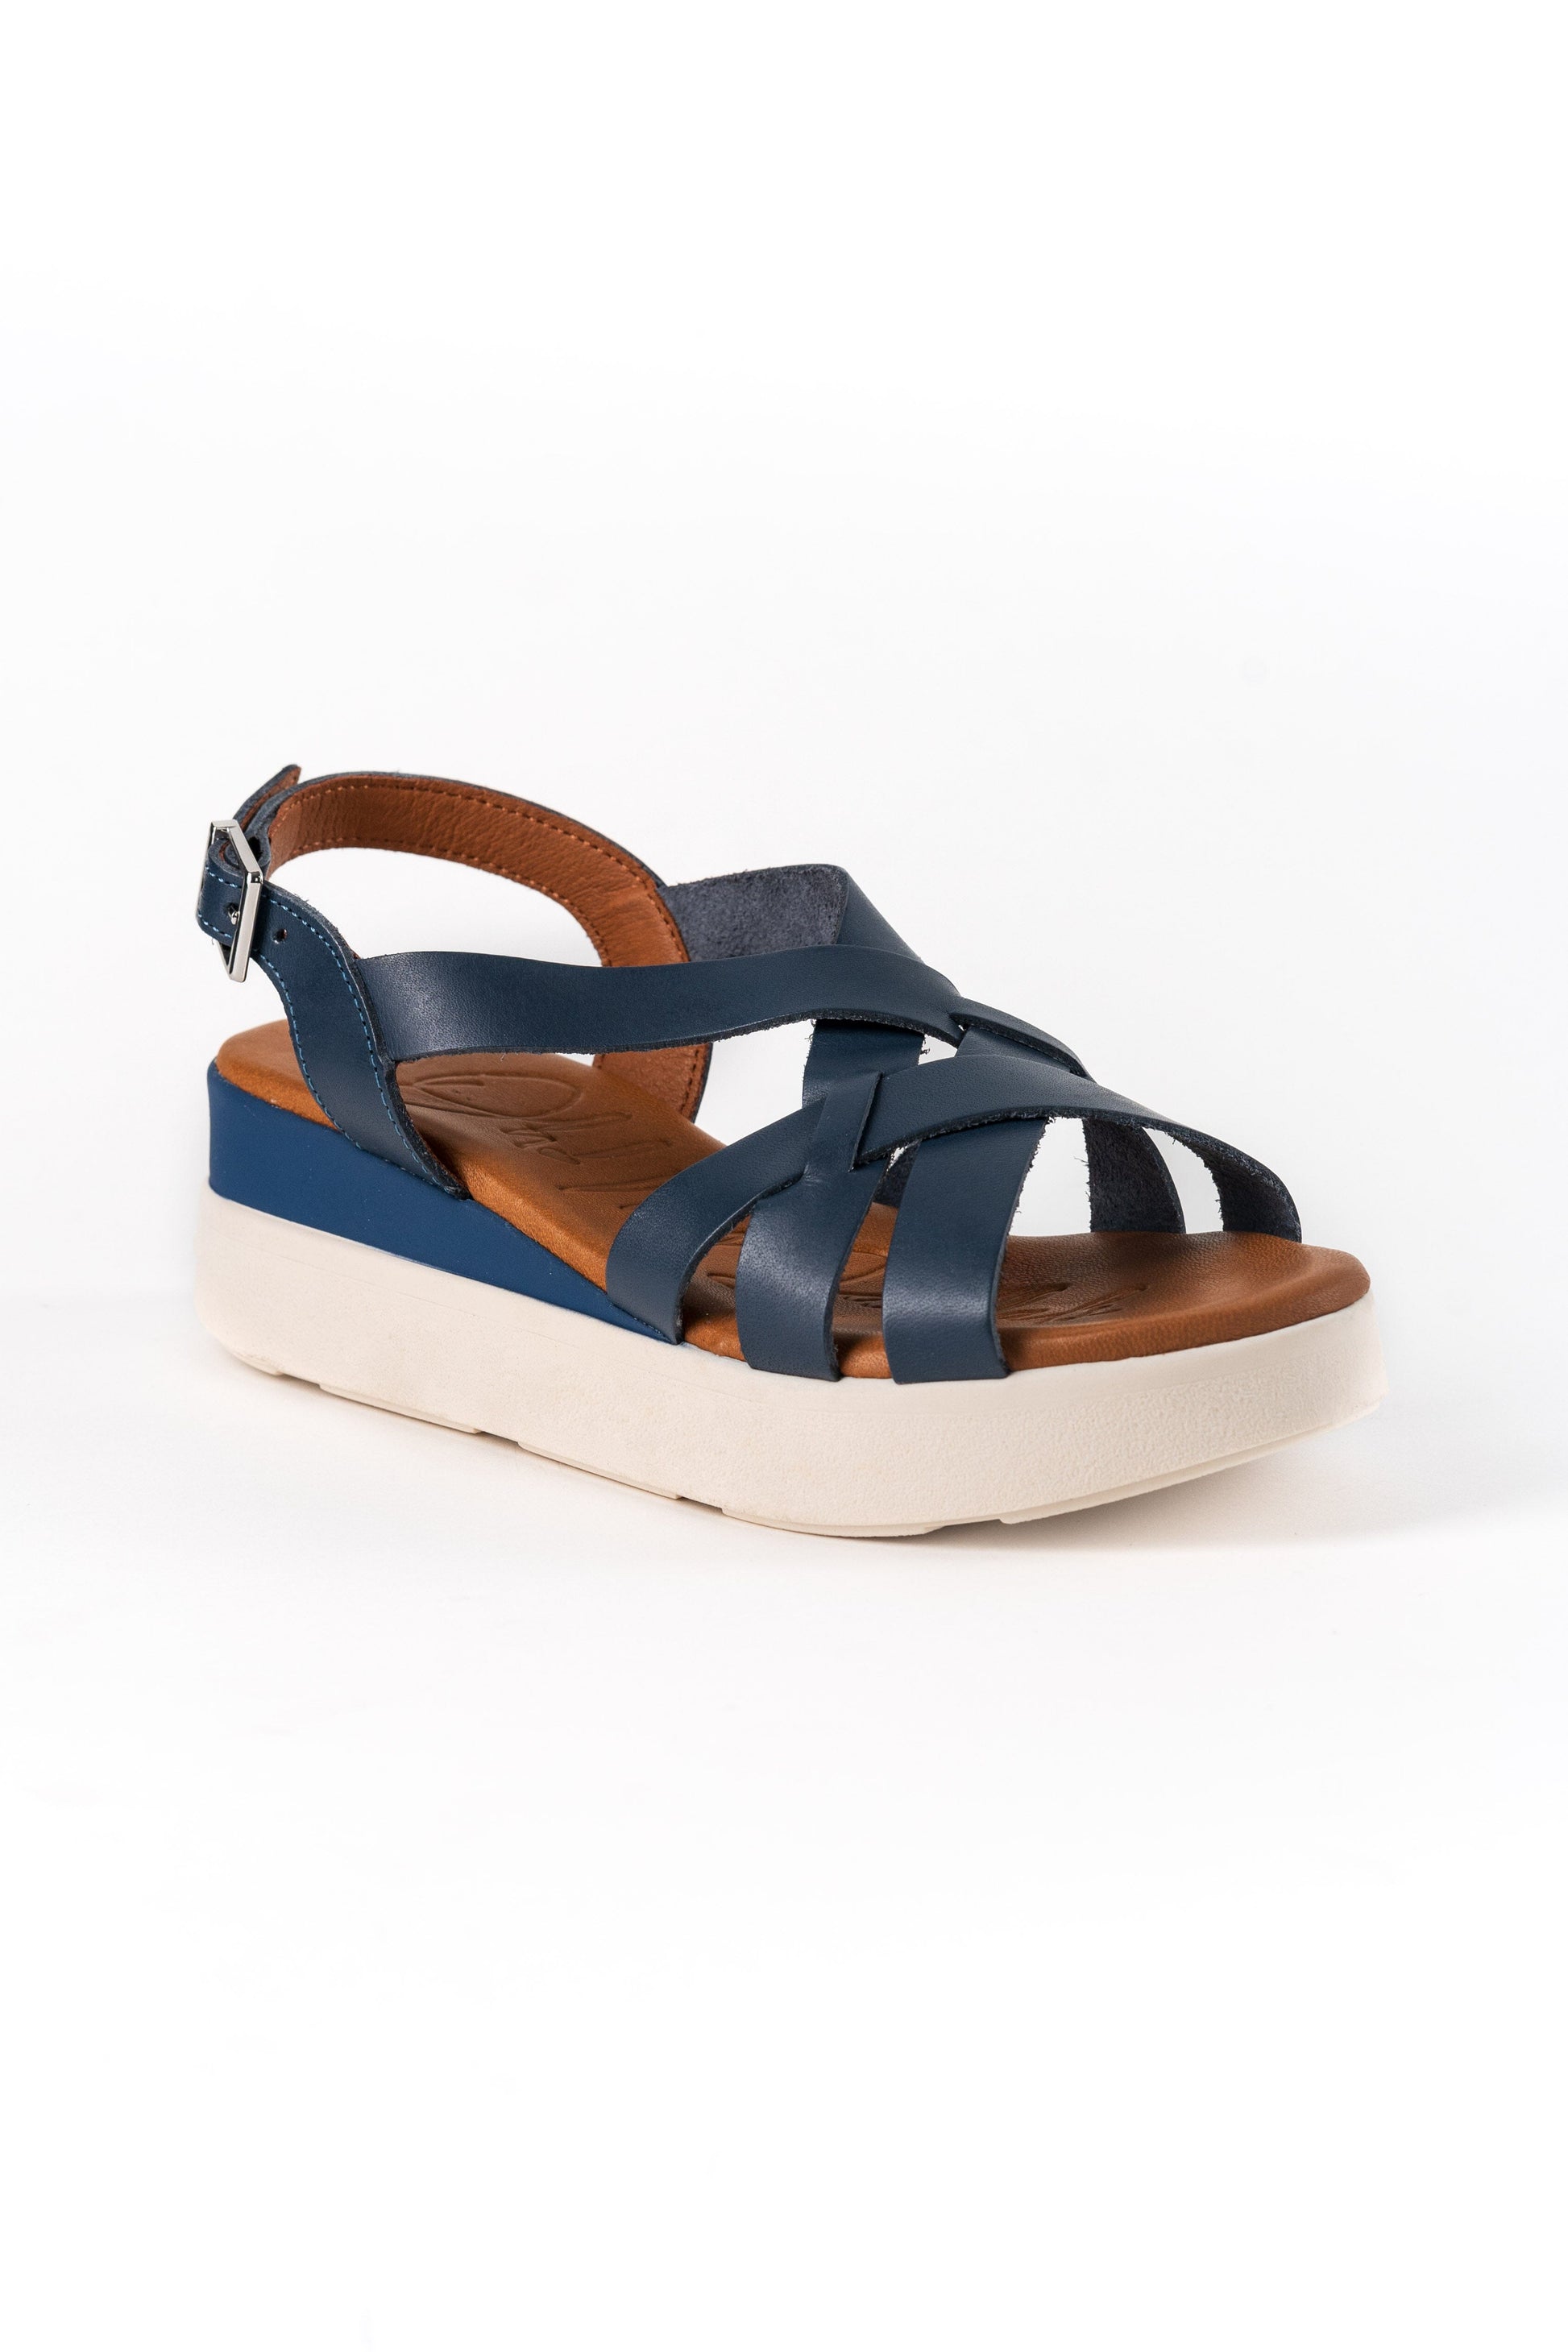 5188 Spanish leather crossed strappy sandals/wedge in Tan and Navy sandals Sam Star Shoes Navy 37/4 